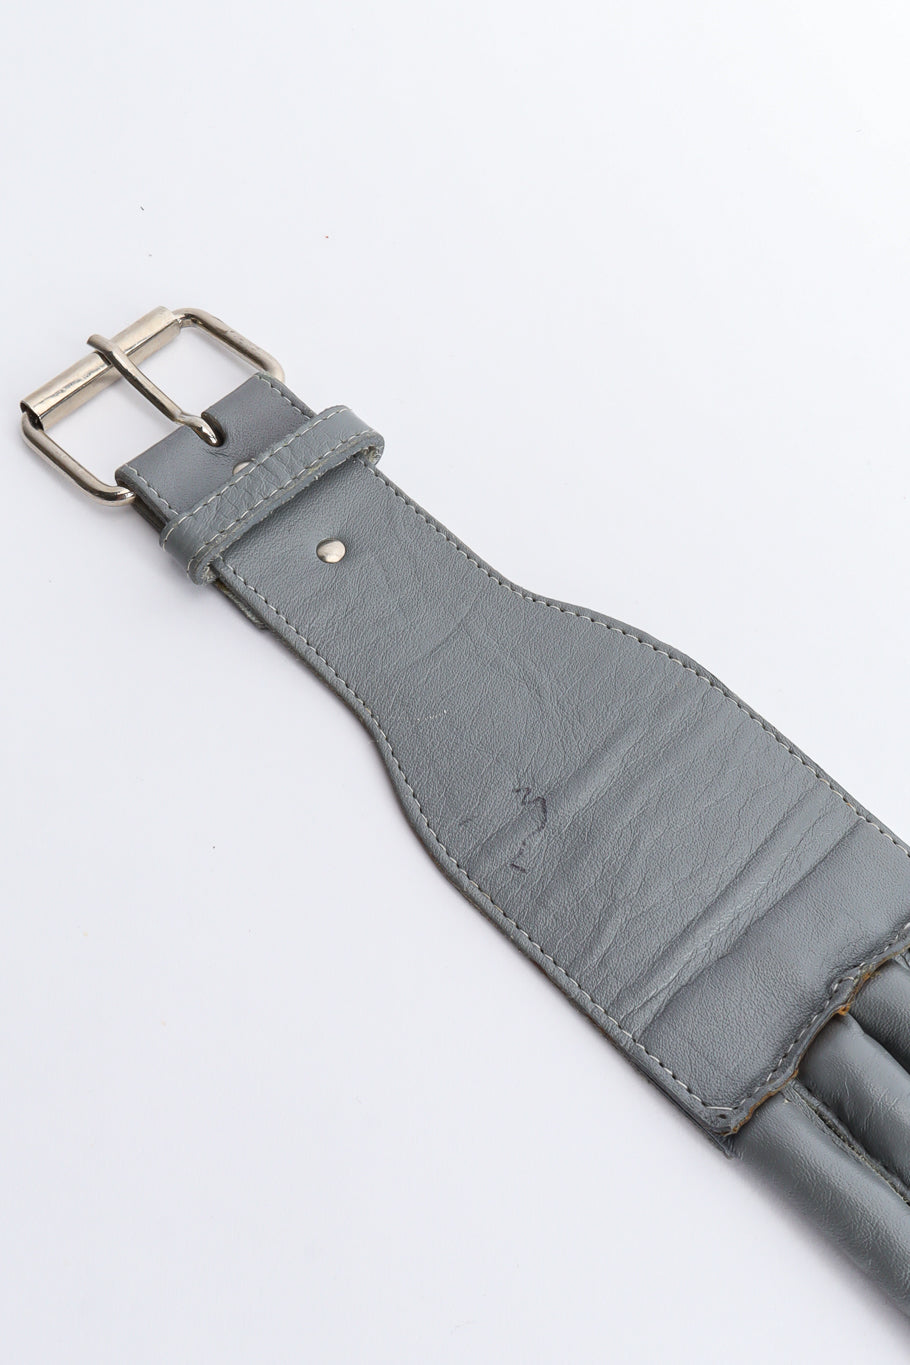 Unique grey leather knotted loop belt close up of buckle and pen mark @recessla